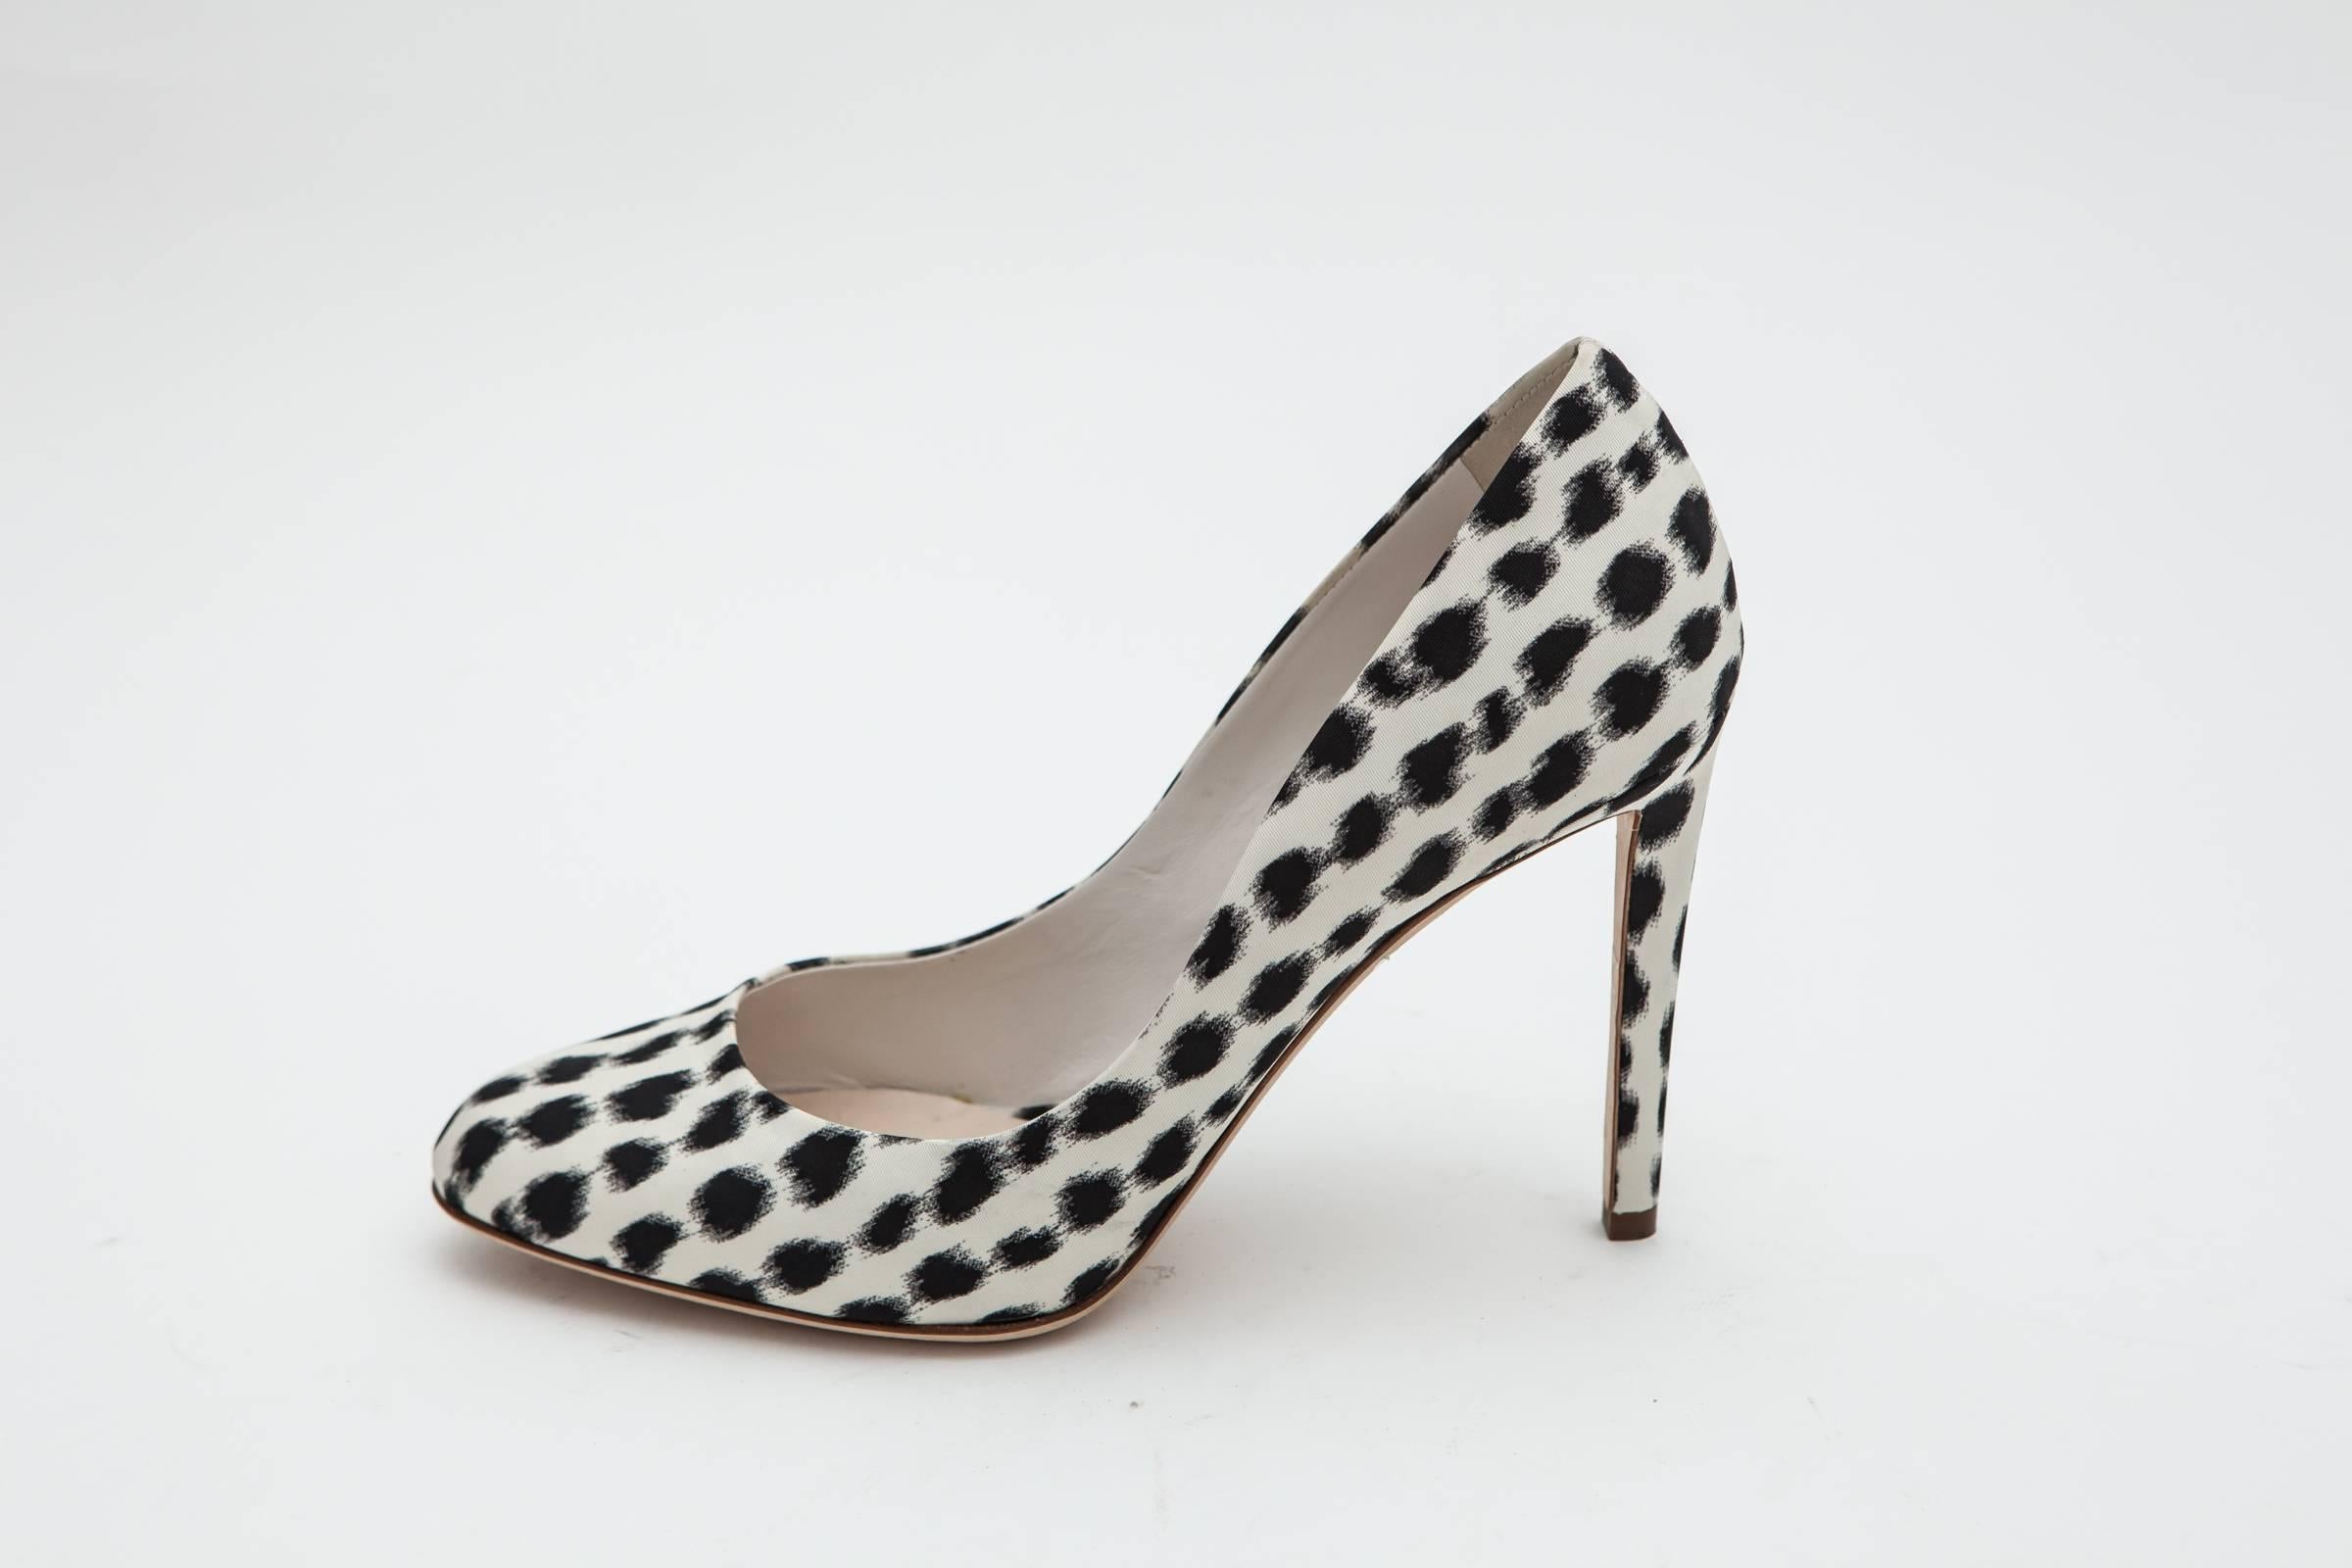 Women's Christian Dior Ivory and Black Patterned Pumps